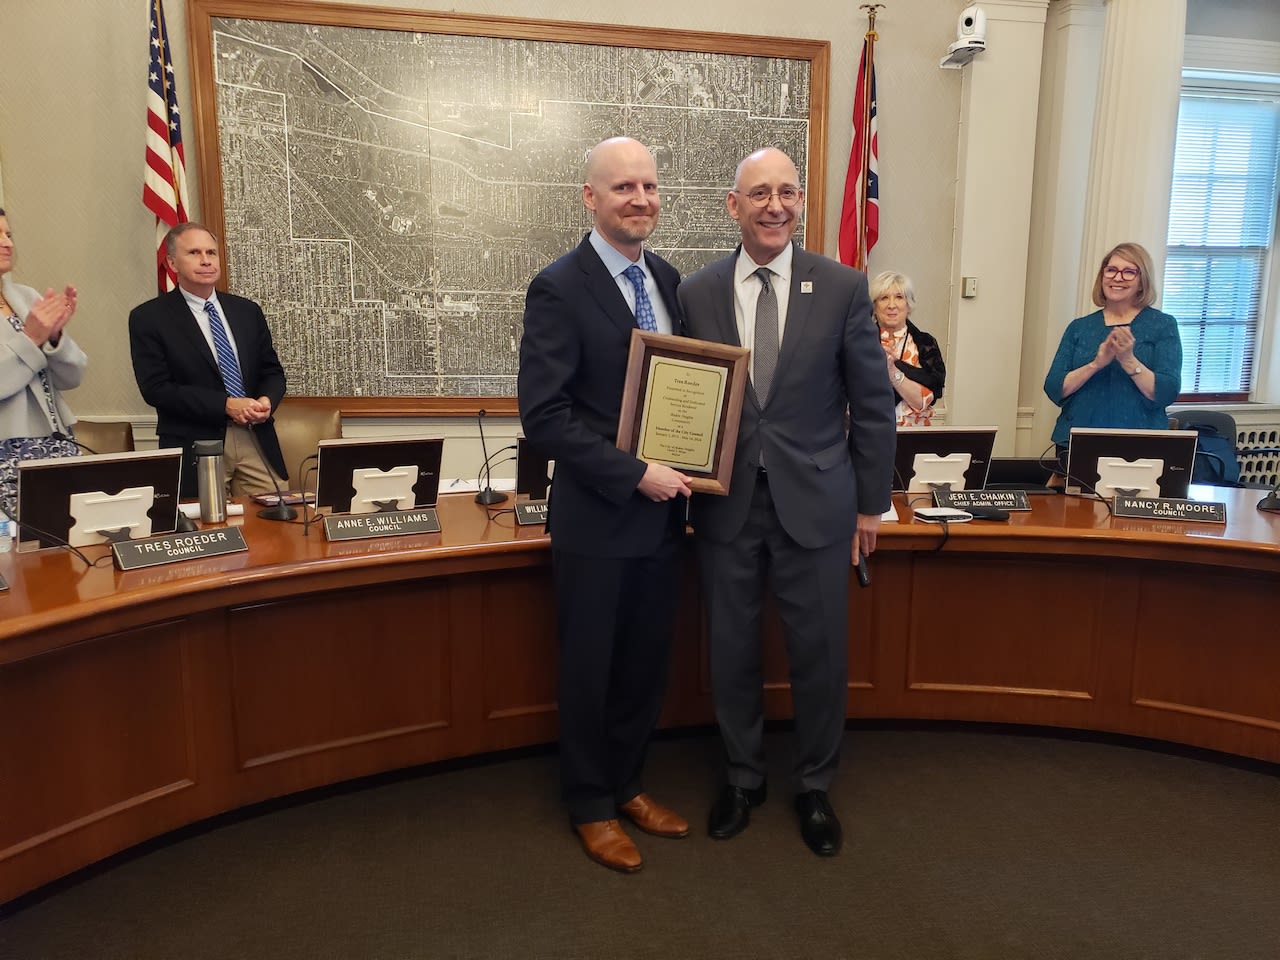 Outgoing Shaker Councilman Tres Roeder honored at last meeting